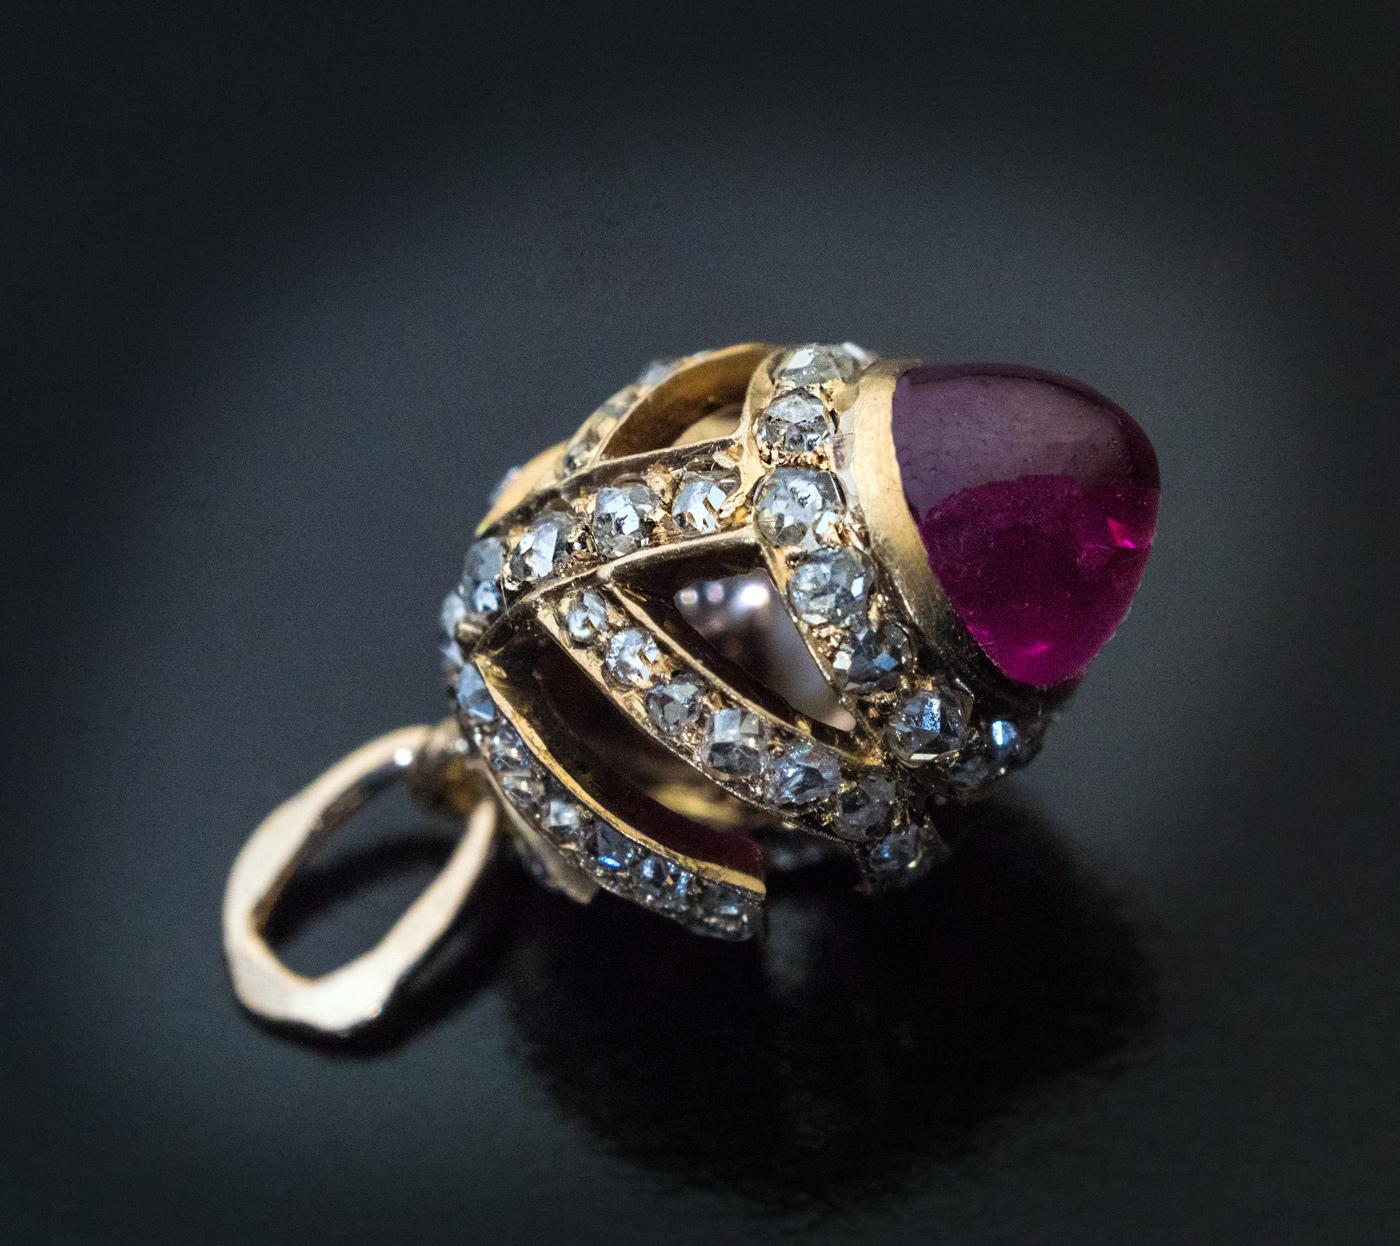 This rare and unusual original FABERGE miniature egg pendant was made in St Petersburg between 1908 and 1917. The openwork 14K gold egg is set with a cabochon cut natural ruby and 72 small rose cut diamonds.

The egg is marked with 56 zolotnik